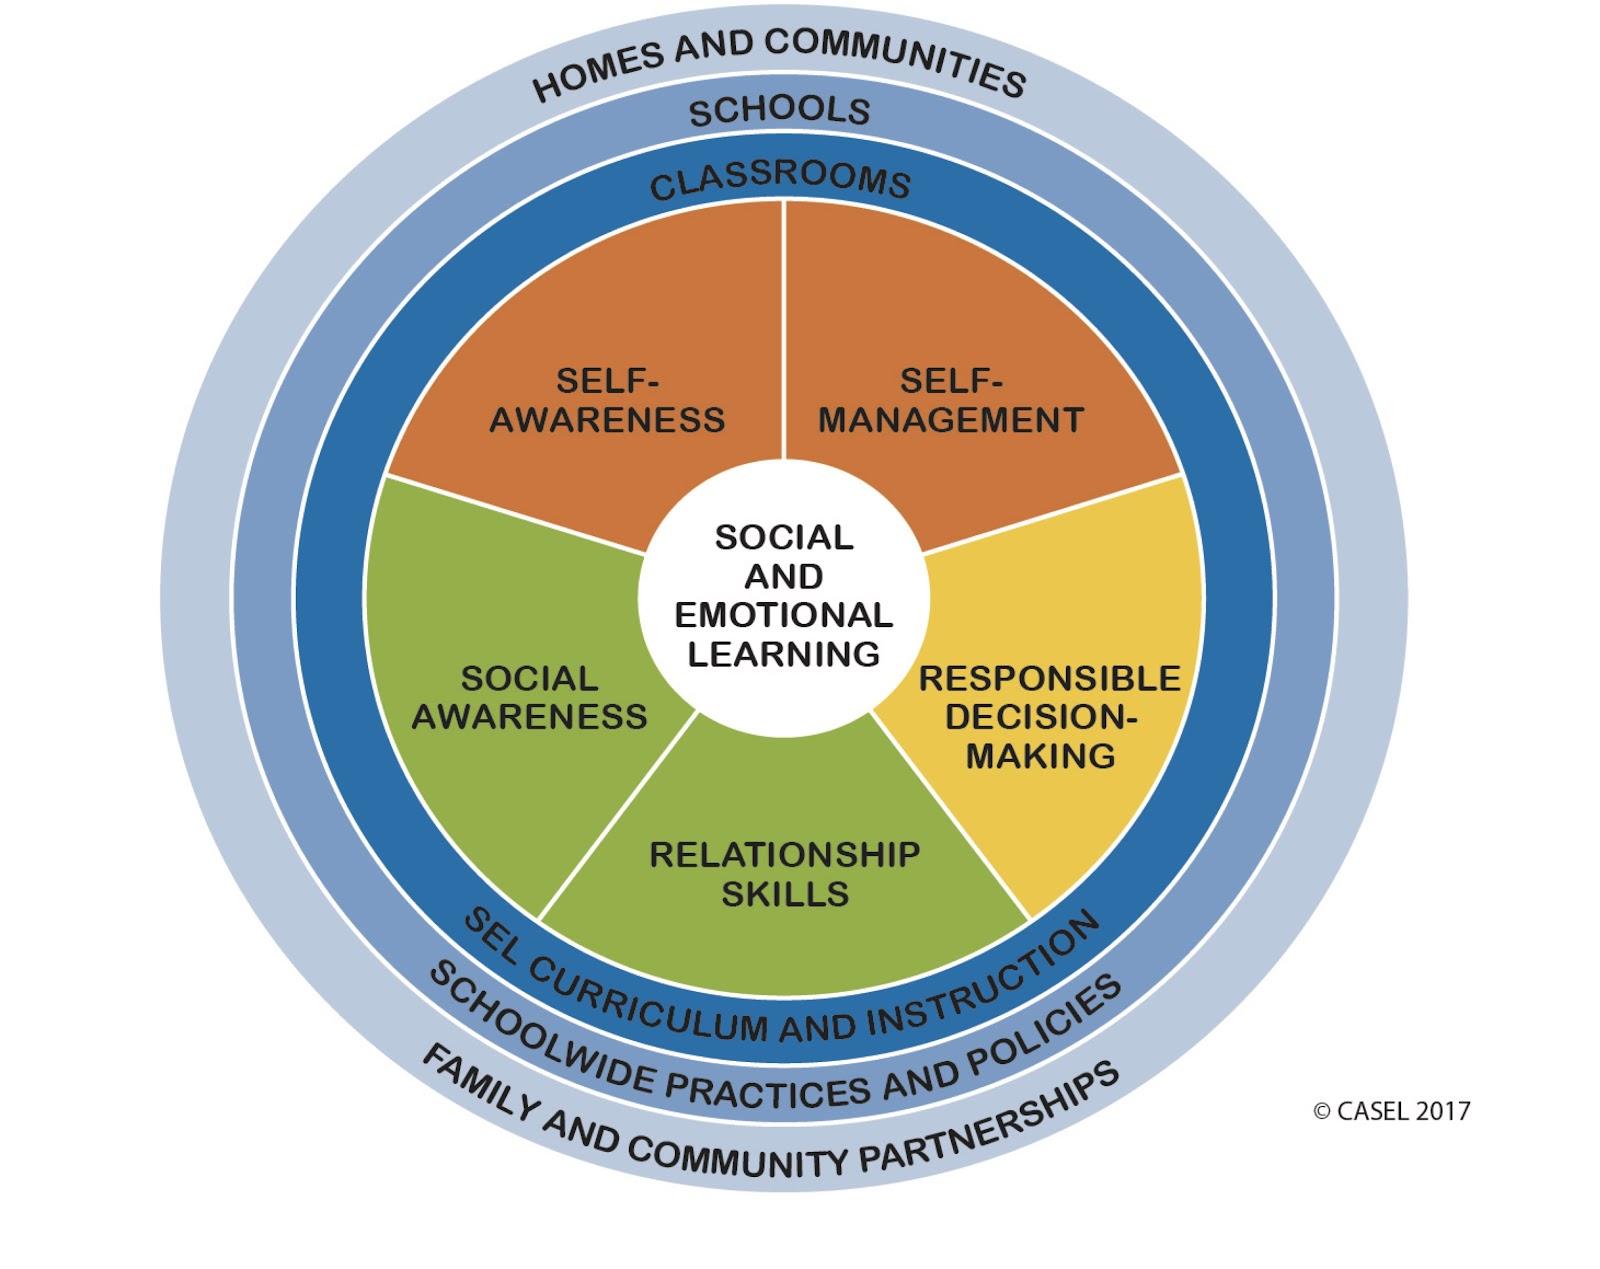 The Open Circle model of social and emotional learning depicted as a series of concentric circles